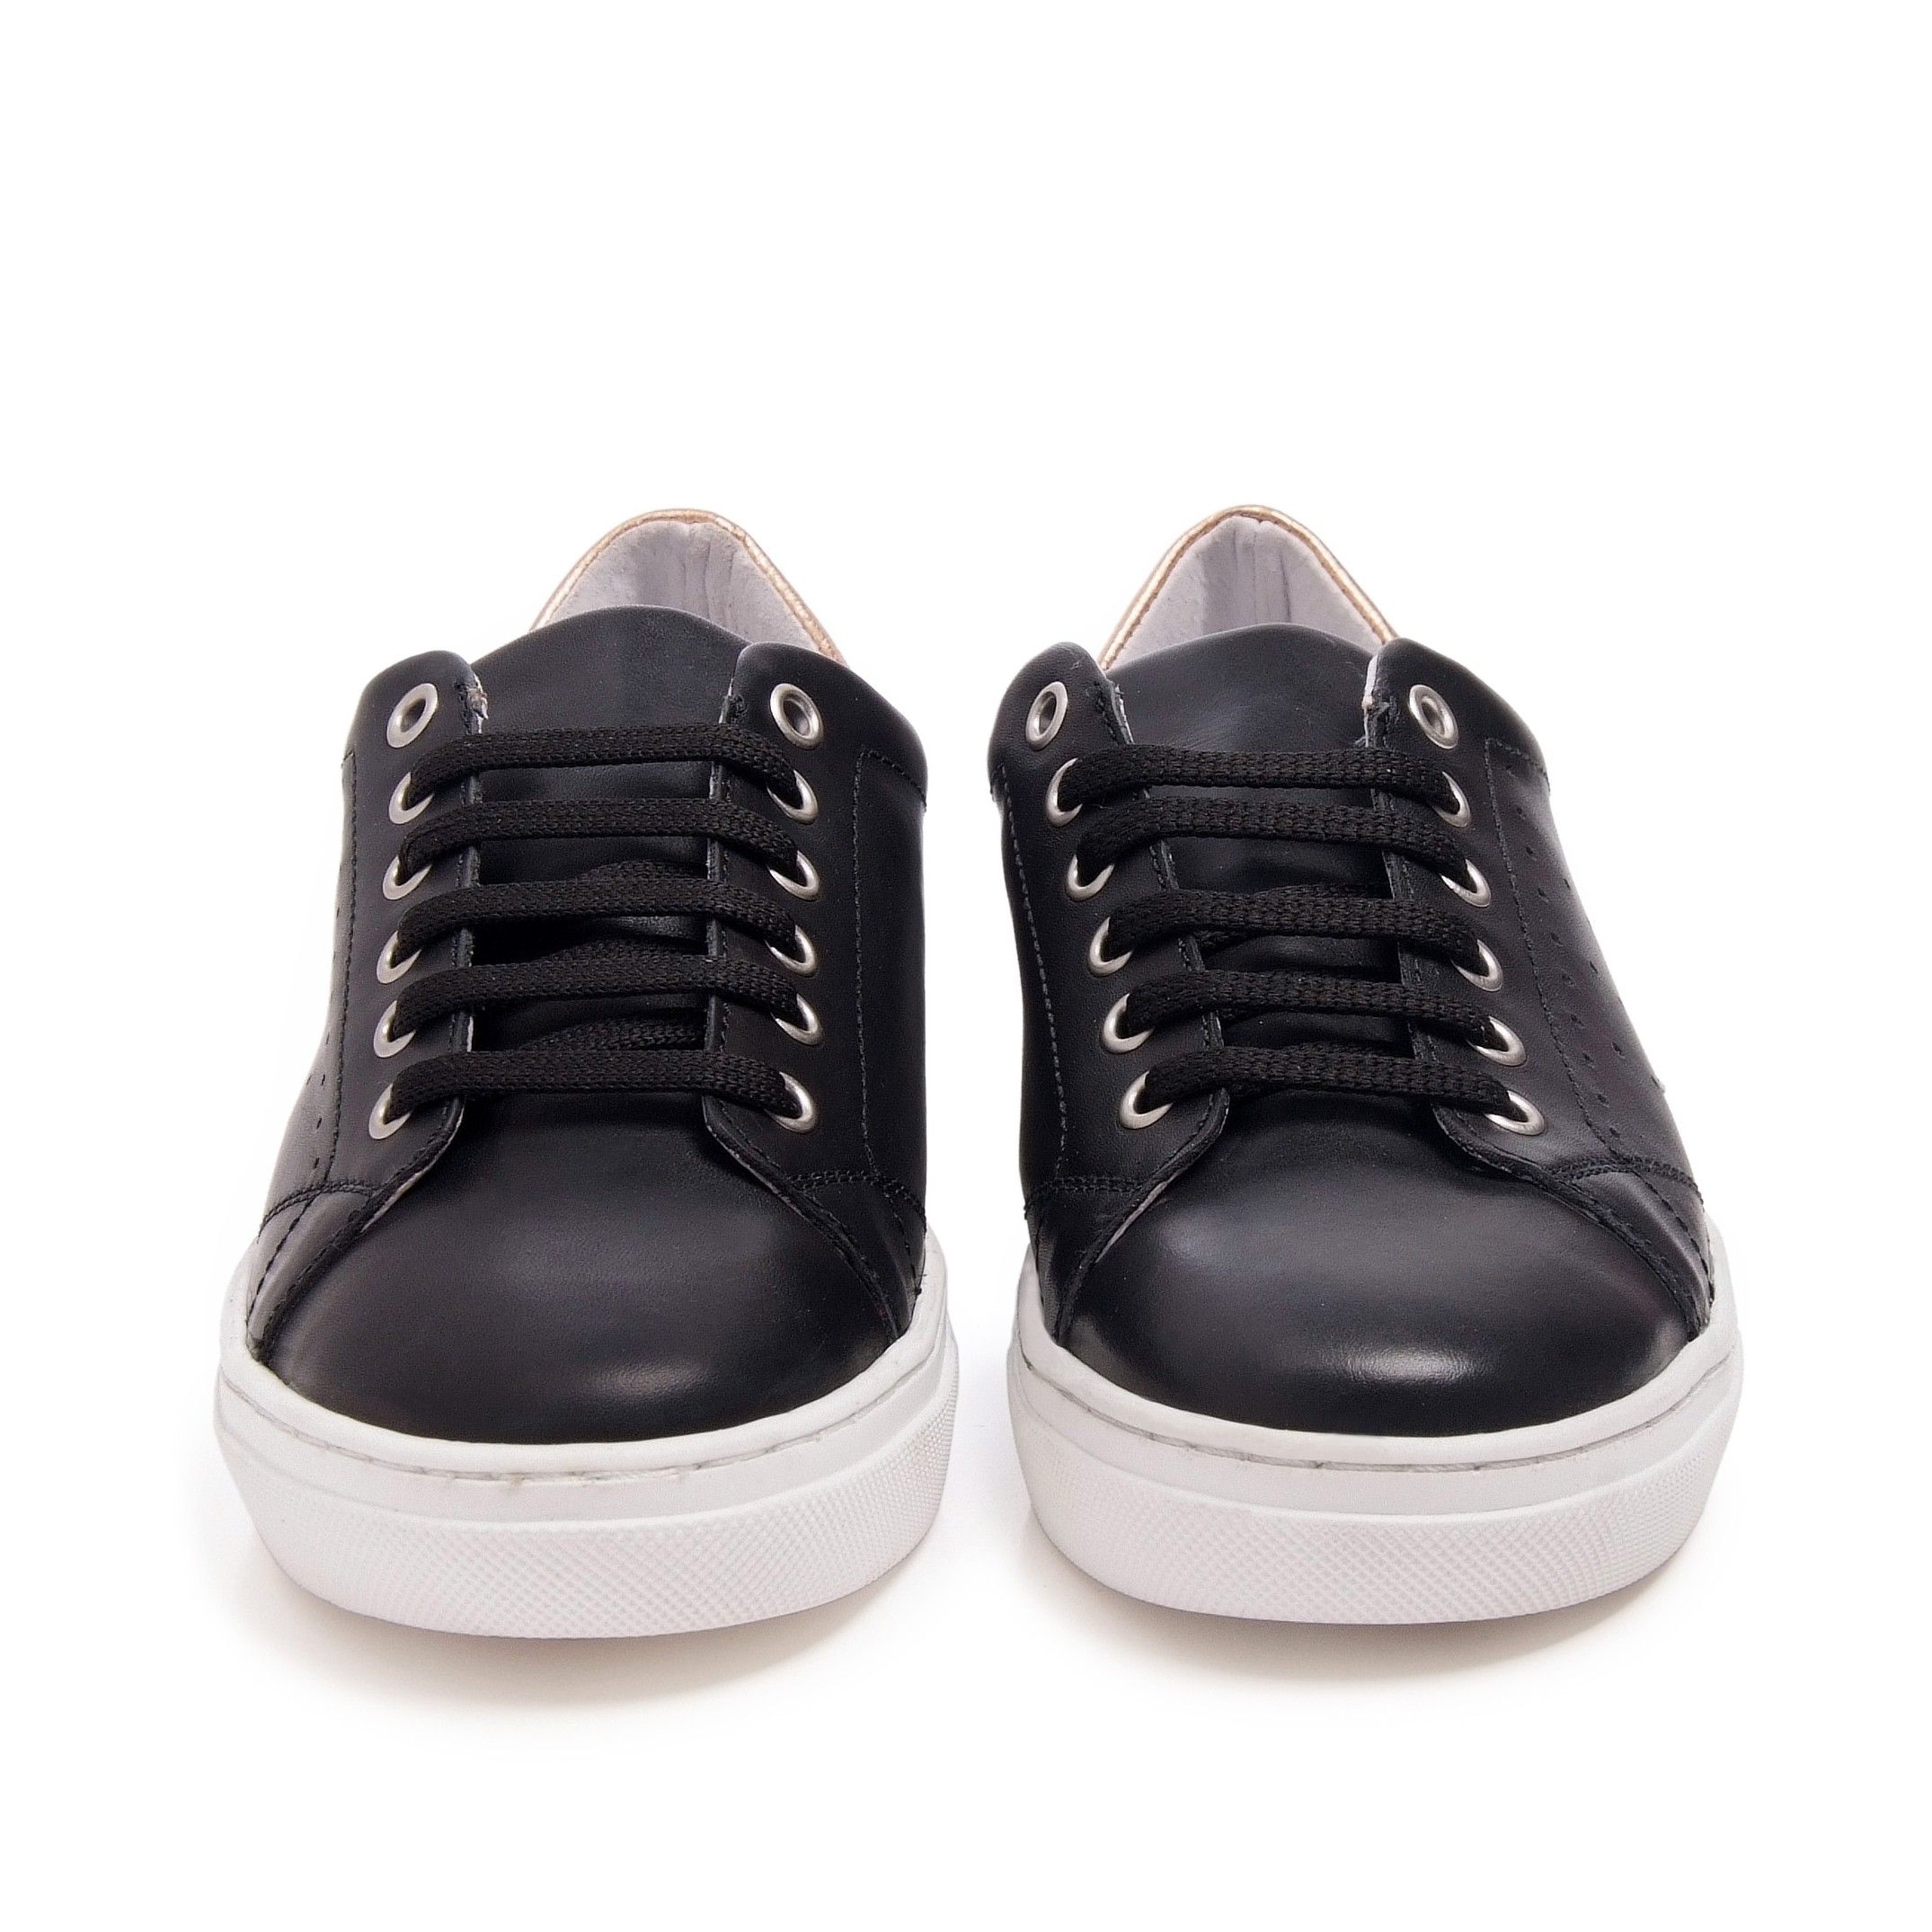 Classic leather sport shoes. Closure: laces. Upper: leather. Inner and insole: leather Sole: rubber. MADE IN SPAIN.